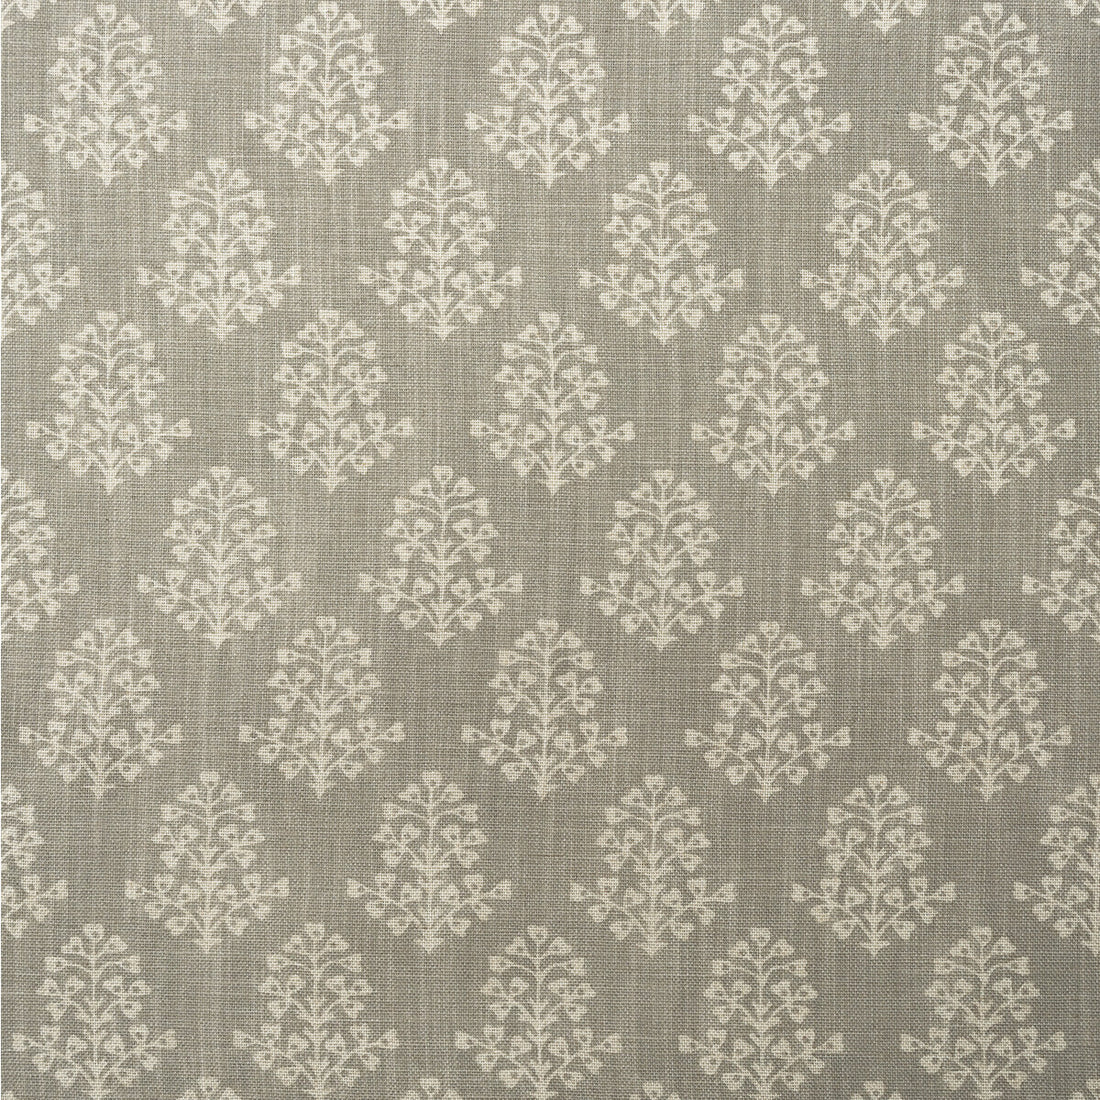 Sprig fabric in cloud color - pattern AM100384.11.0 - by Kravet Couture in the Andrew Martin Garden Path collection